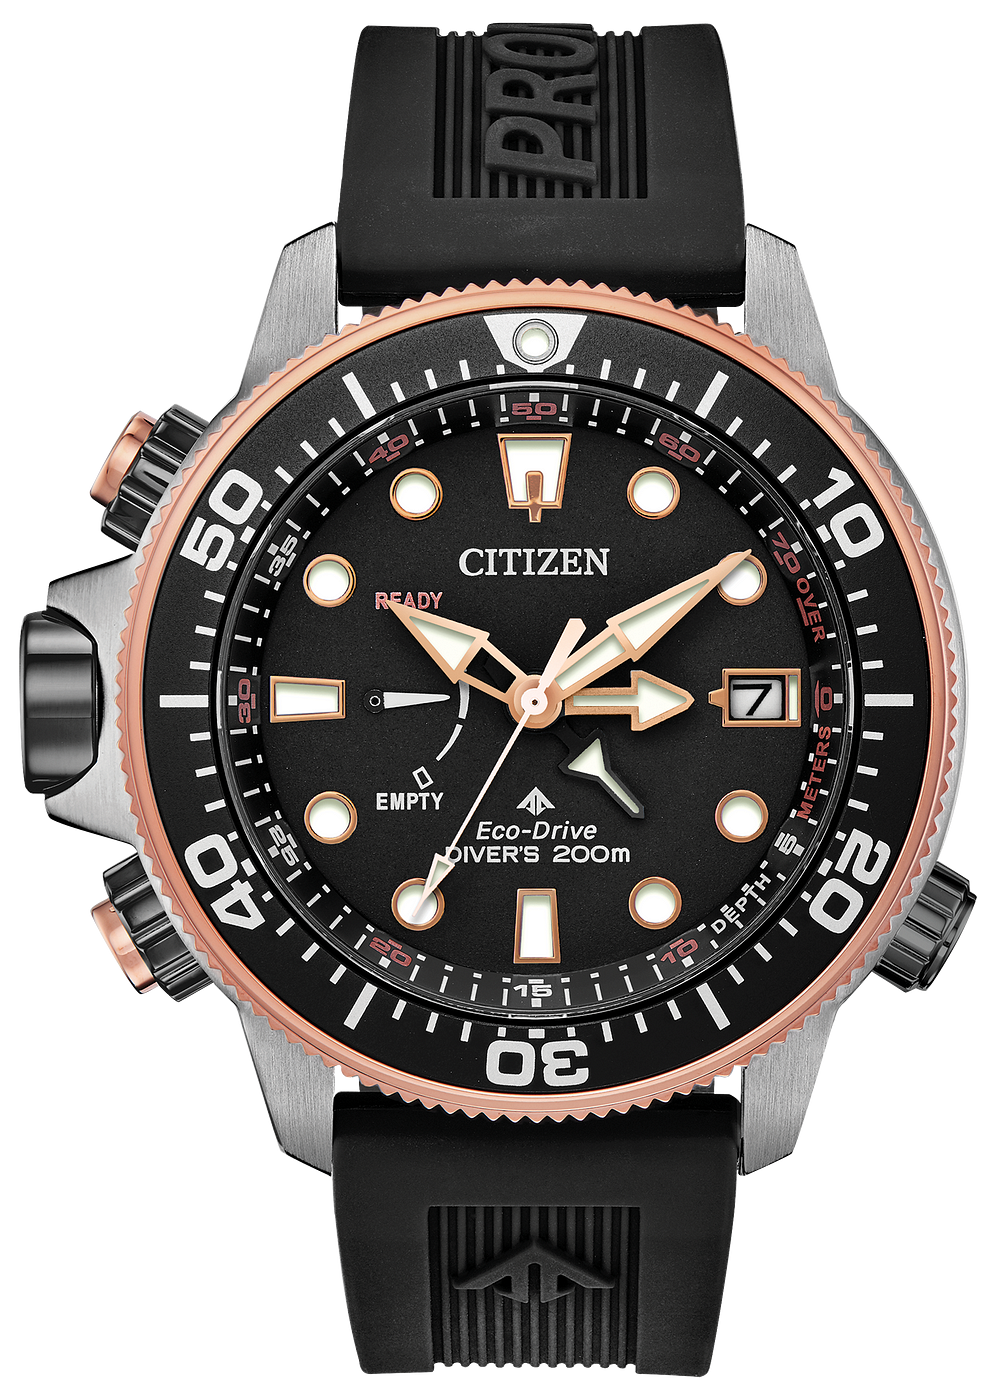 Citizen Promaster Aqualand Eco-Drive Limited Edition Watch ...